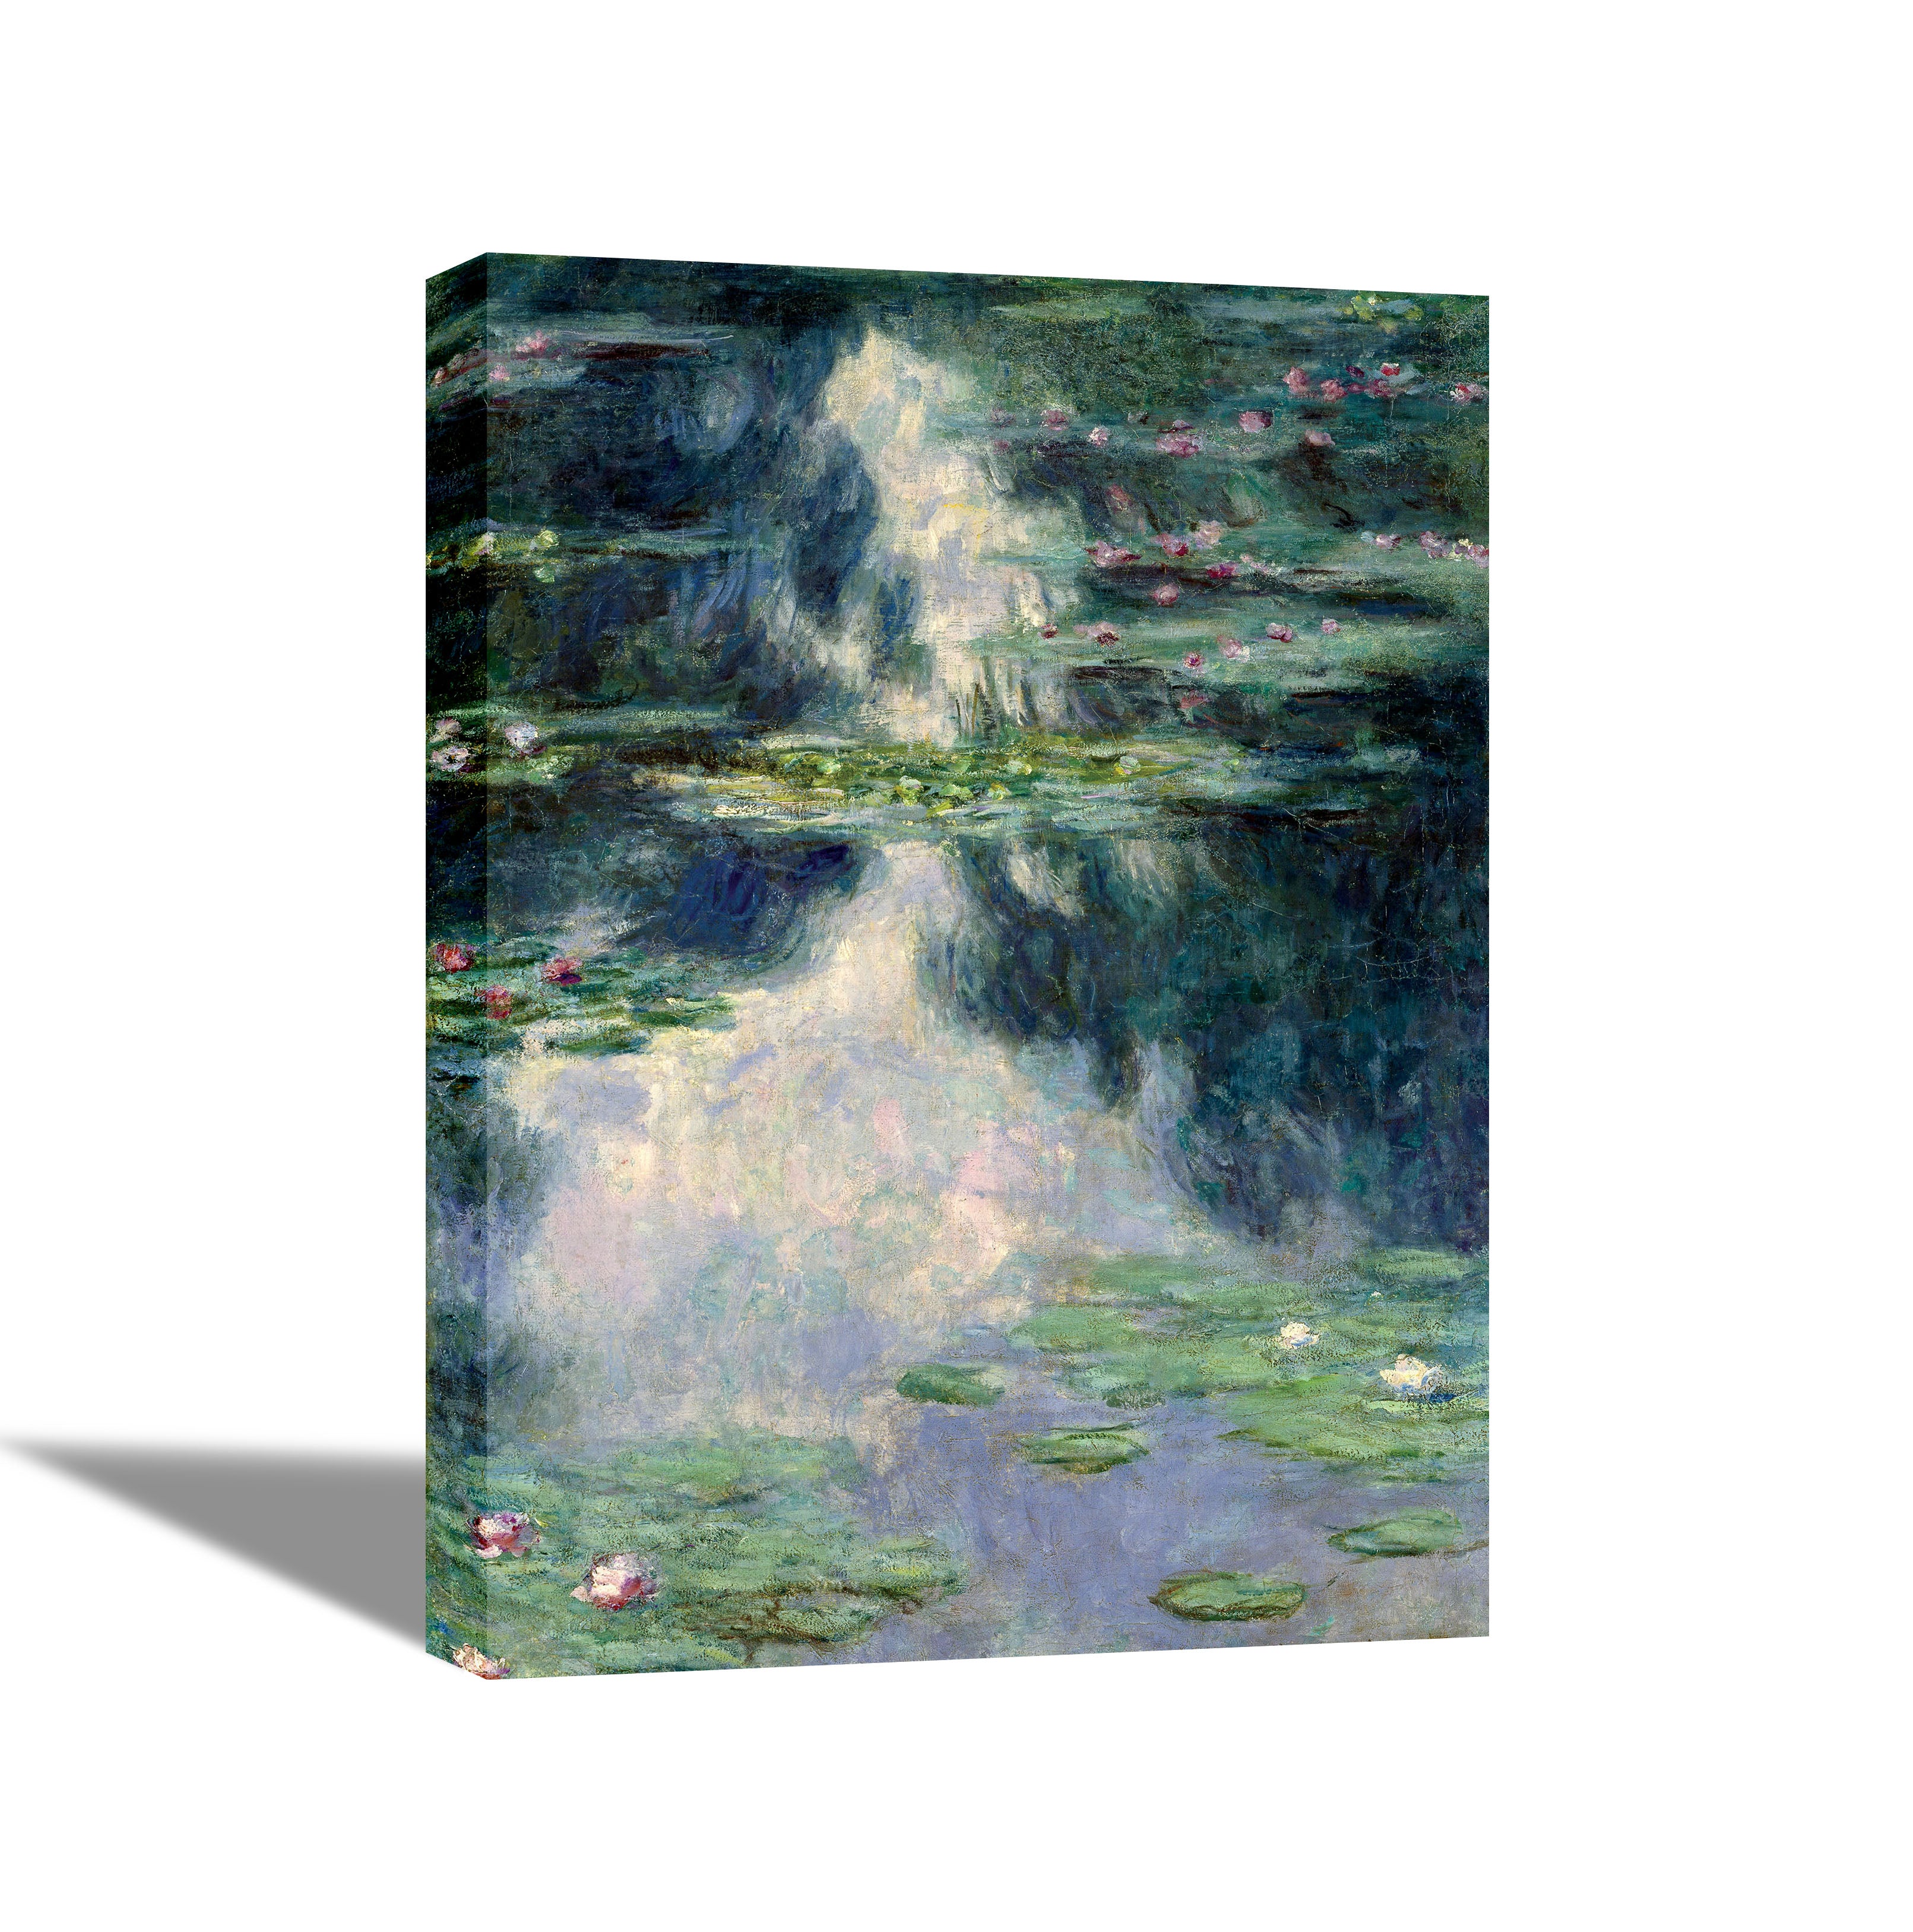 Pond with Water Lilies - Canvas Painting - Framed